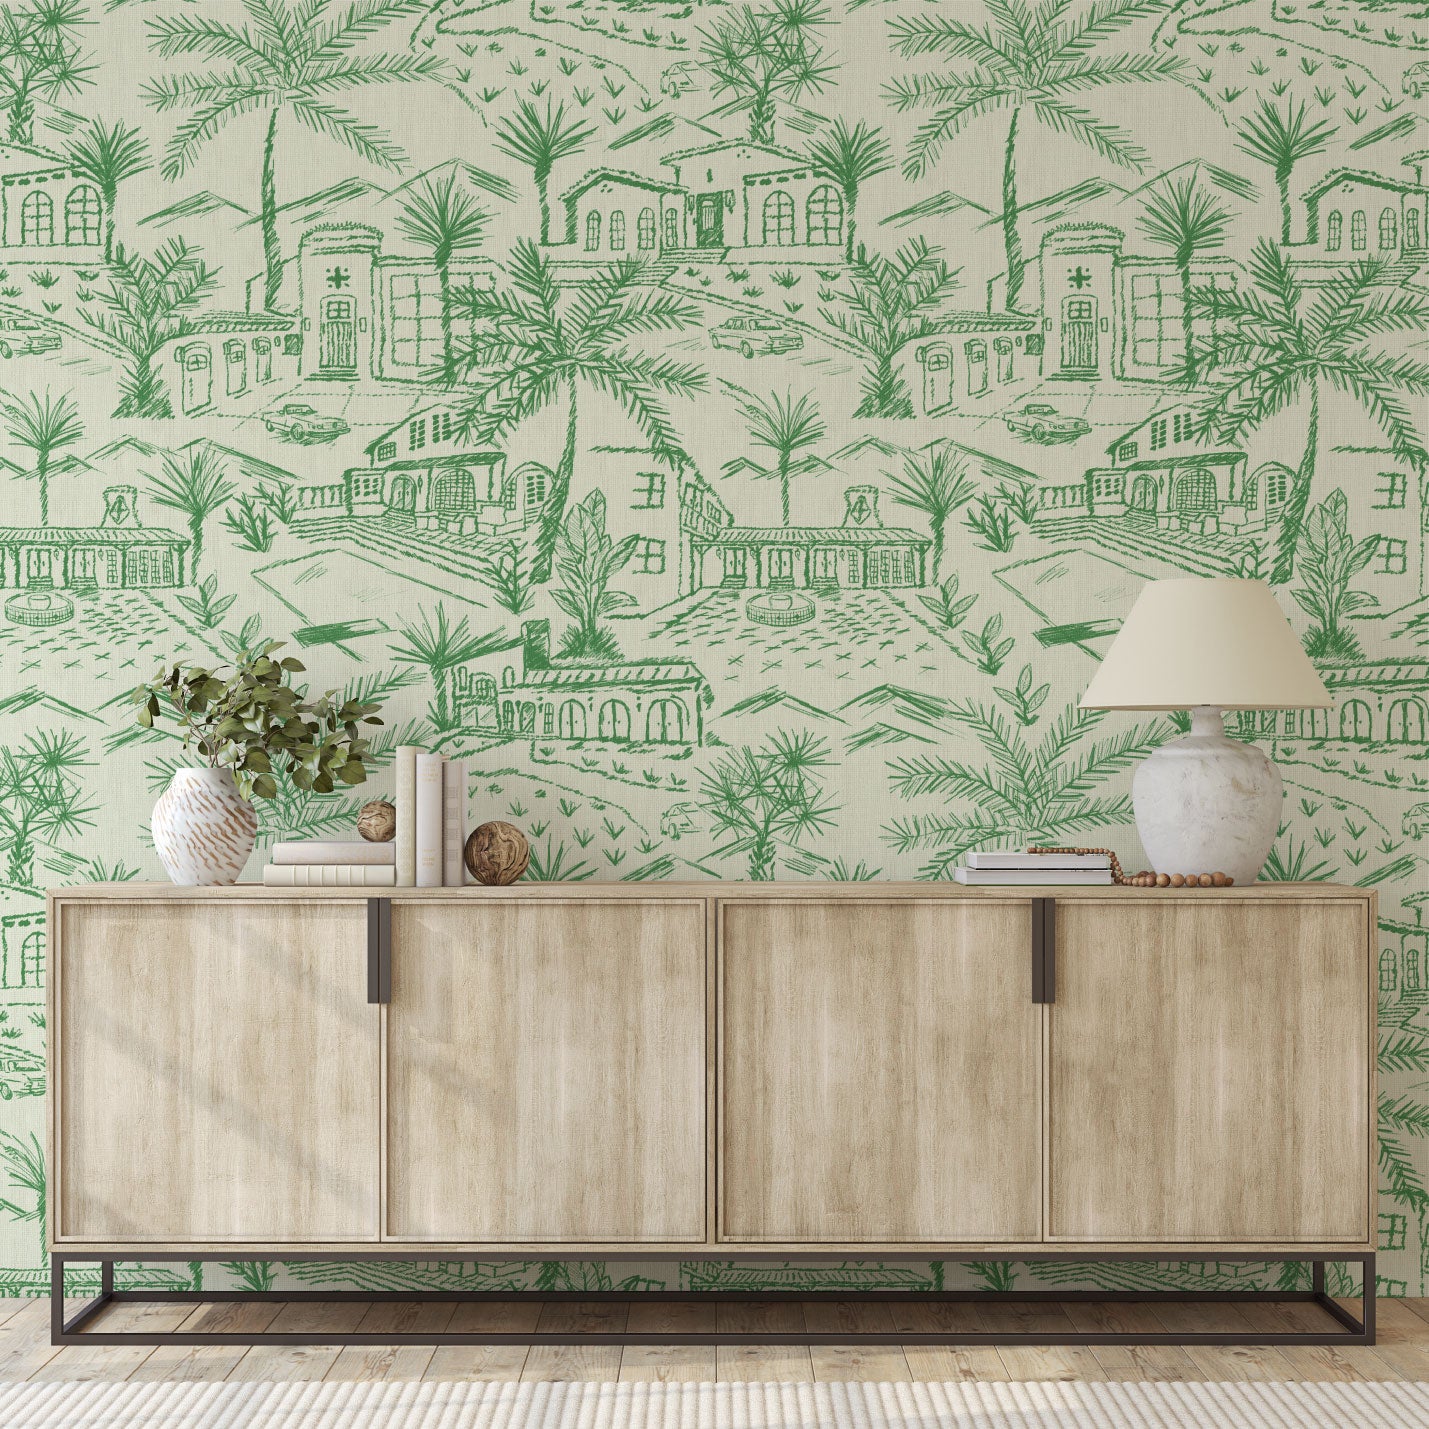 Paperweave paper weave printed modern toile design featuring a 2 color print with Spanish style houses, variety of palm trees and tropical and desert inspired plants, massive pools, vintage cars and fountains with mountains in the background entrance foyer